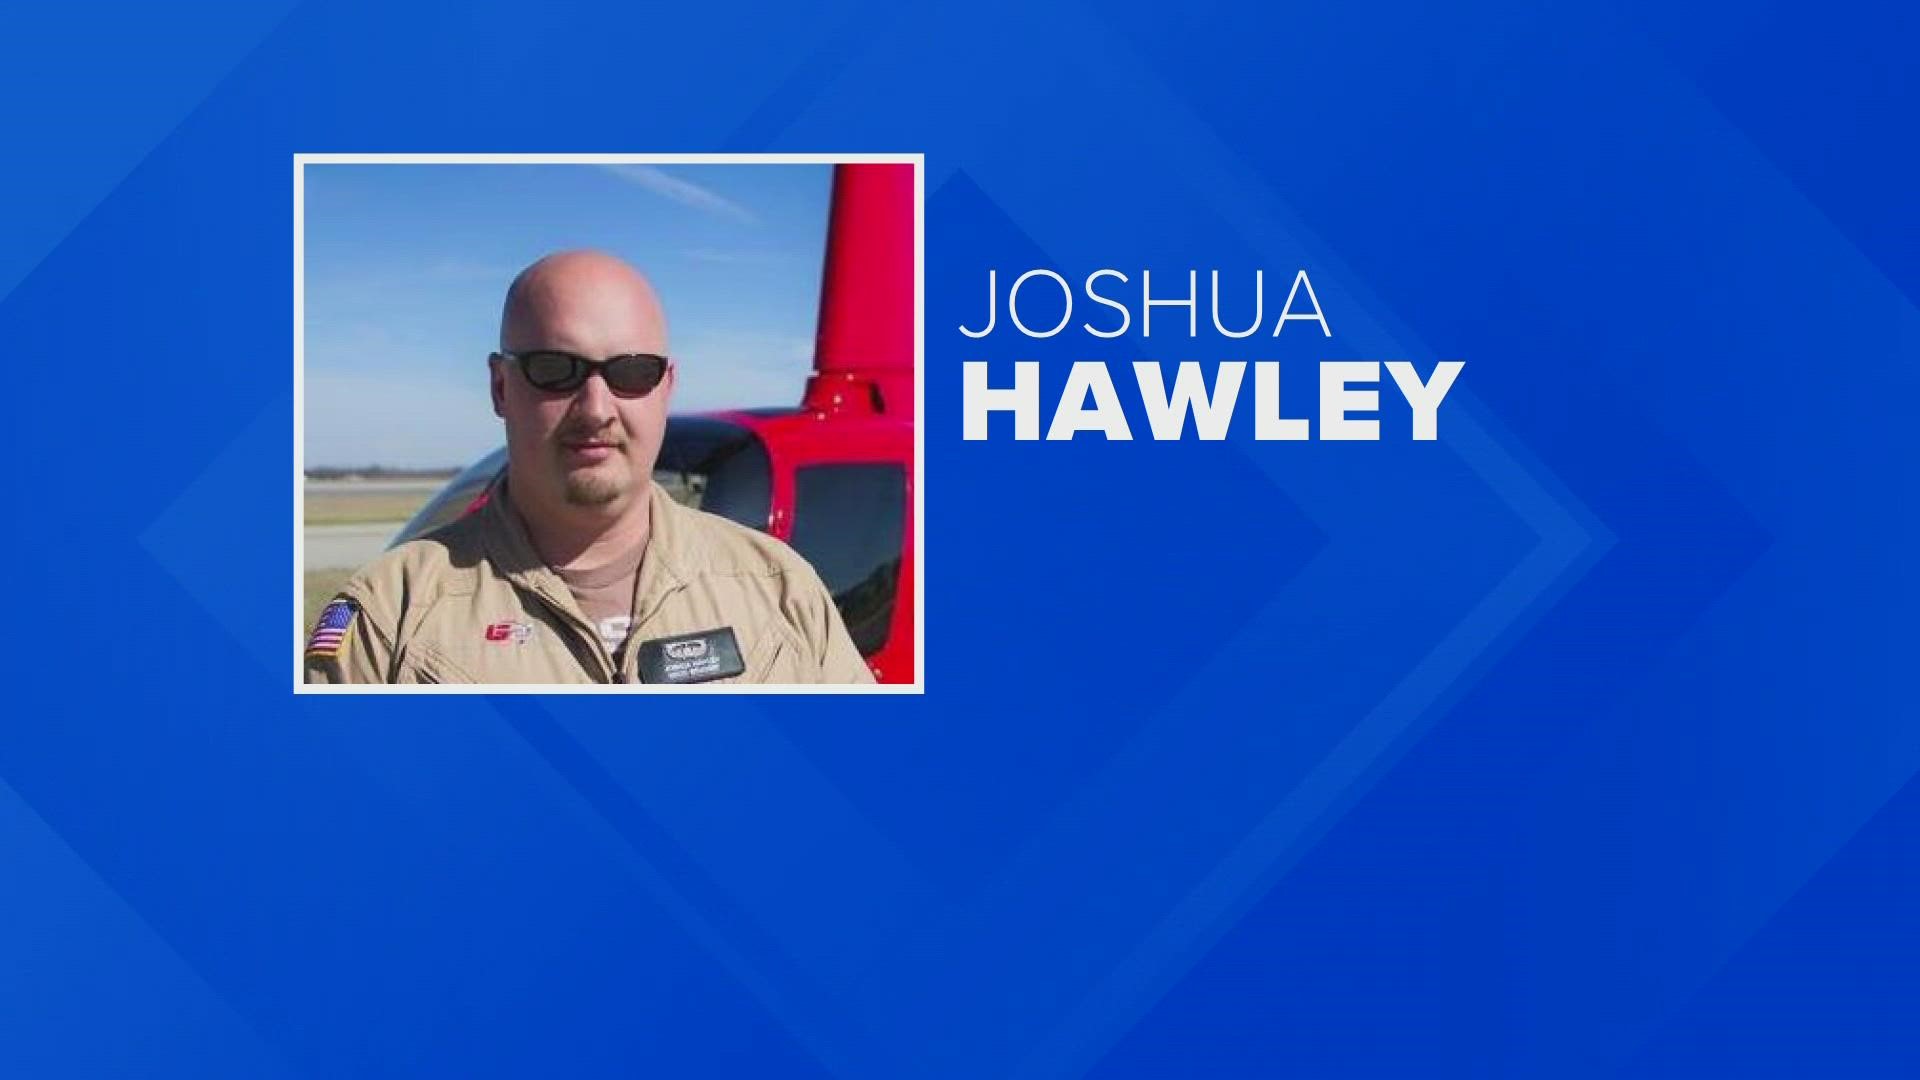 The pilot was identified as Joshua Hawley of Livingston Parish and was a flight instructor and previously served in the Marines.